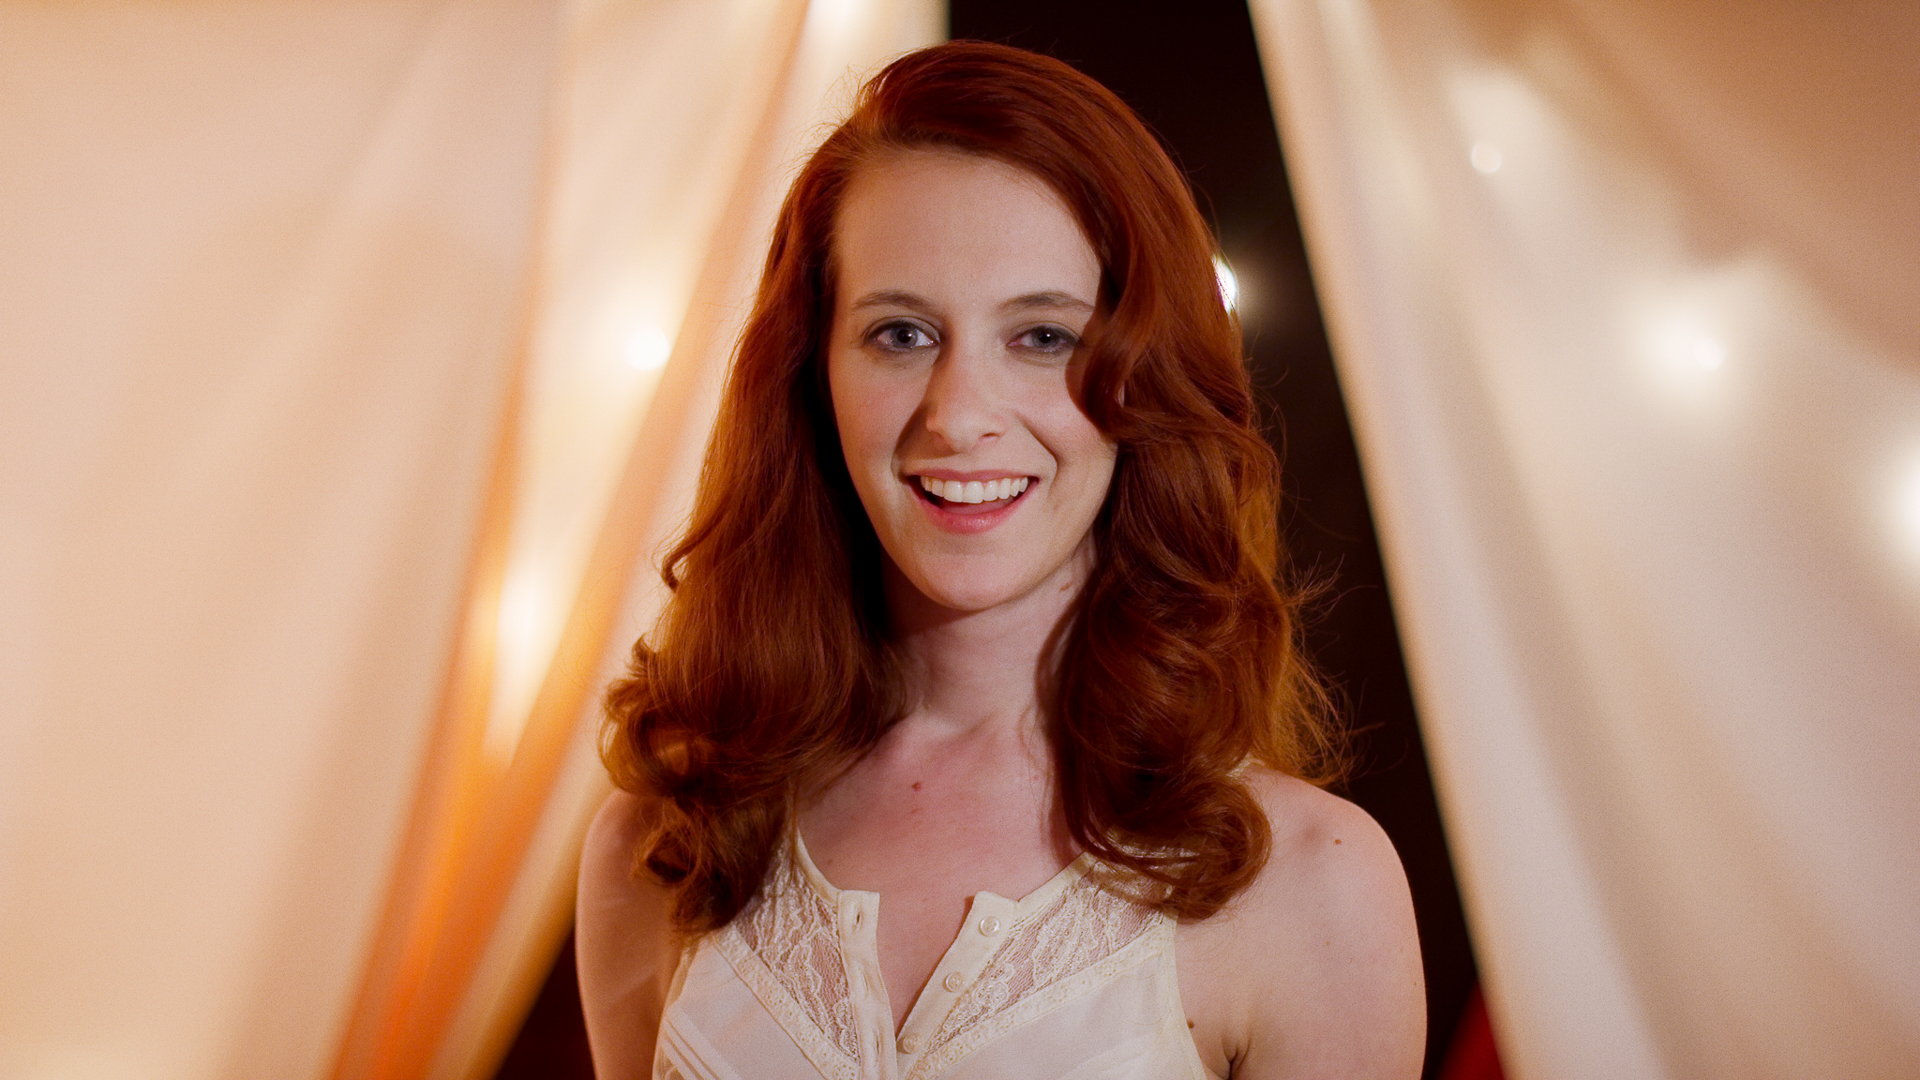 Woman with long red hair smiles at camera in a white tented room with ball lights.